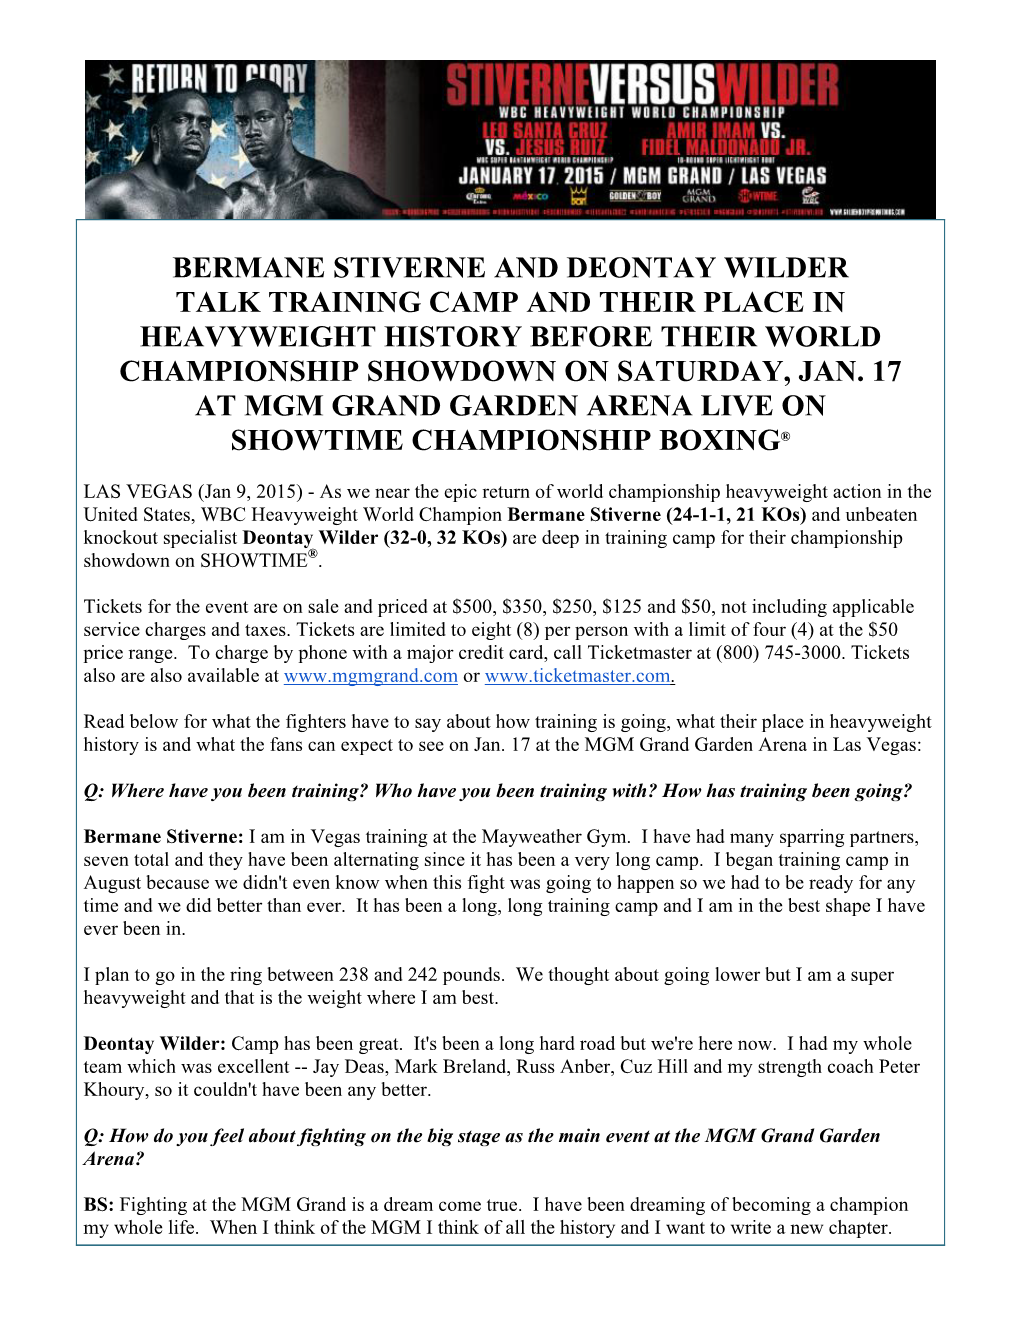 Bermane Stiverne and Deontay Wilder Talk Training Camp and Their Place in Heavyweight History Before Their World Championship Showdown on Saturday, Jan